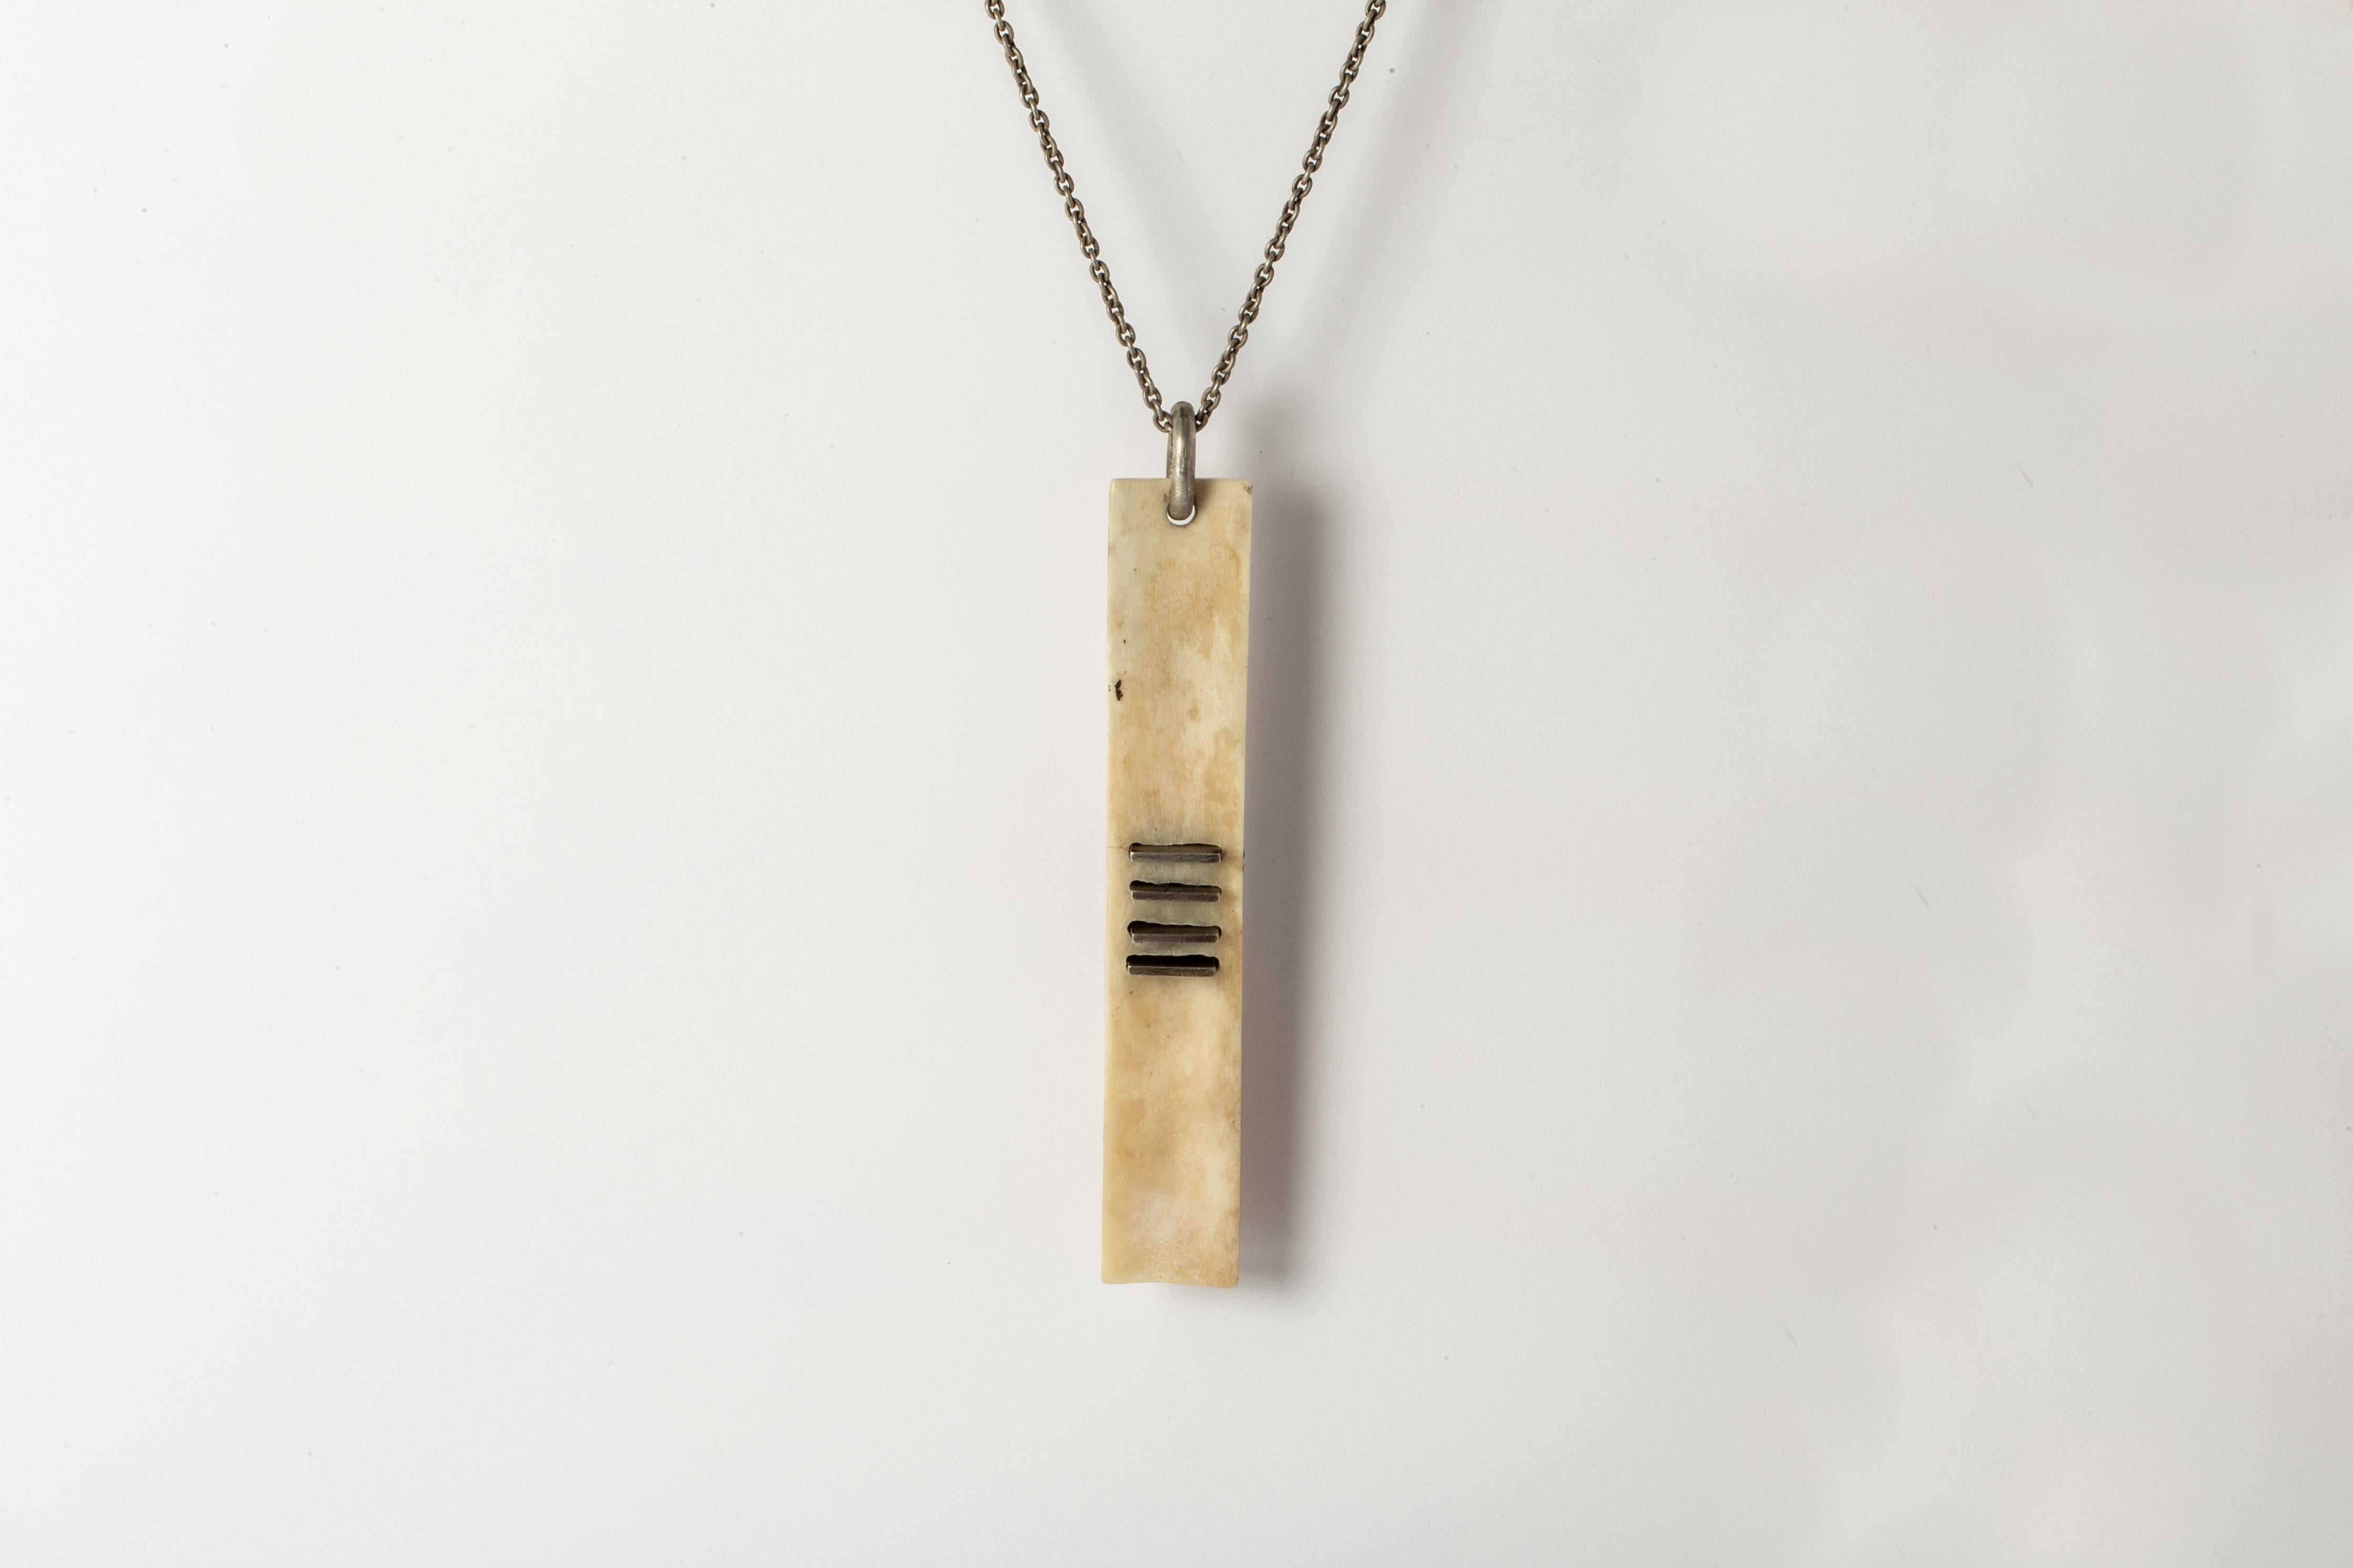 Handcarved plate necklace made of bone with sterling silver slabs, it comes on a 74cm sterling silver chain.